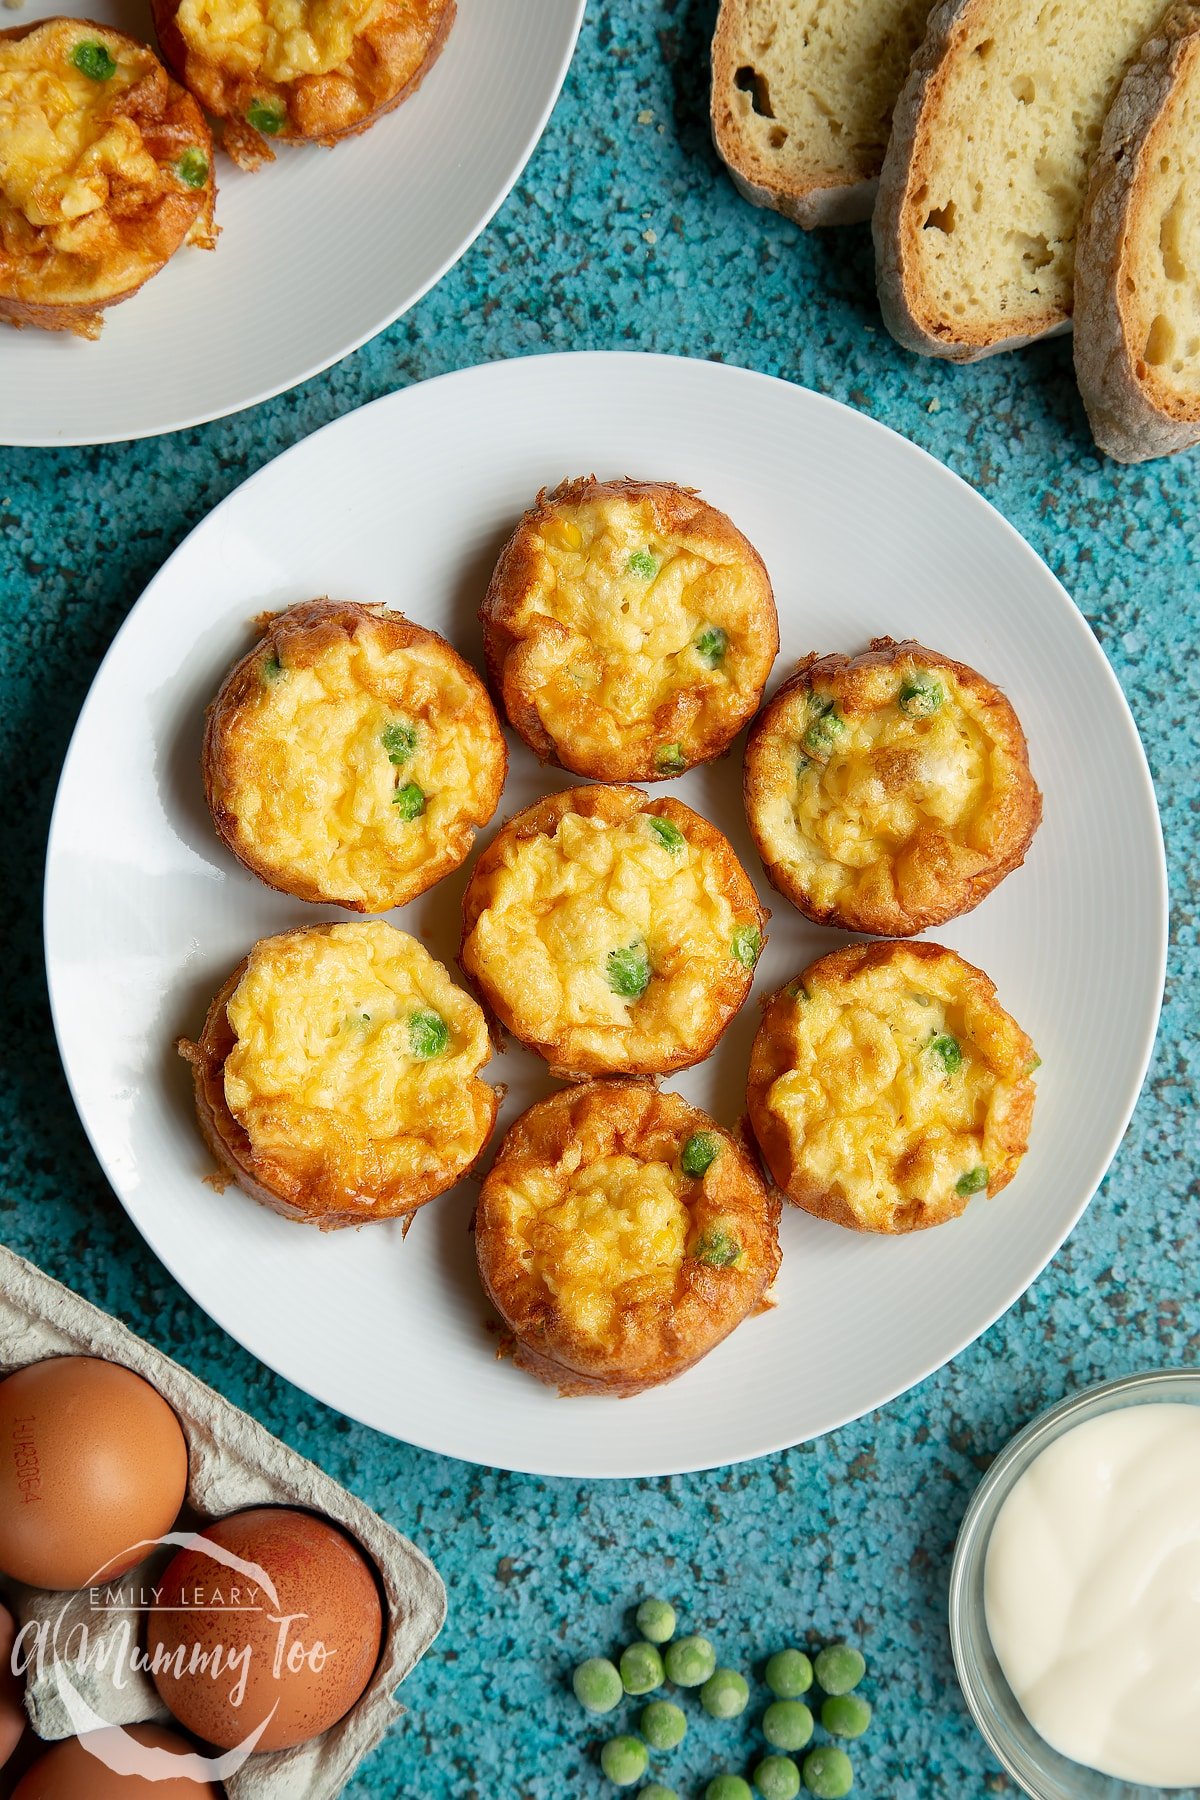 Mini vegetable frittatas arranged on a white plate. Slices of bread and ingredients surround the plate.